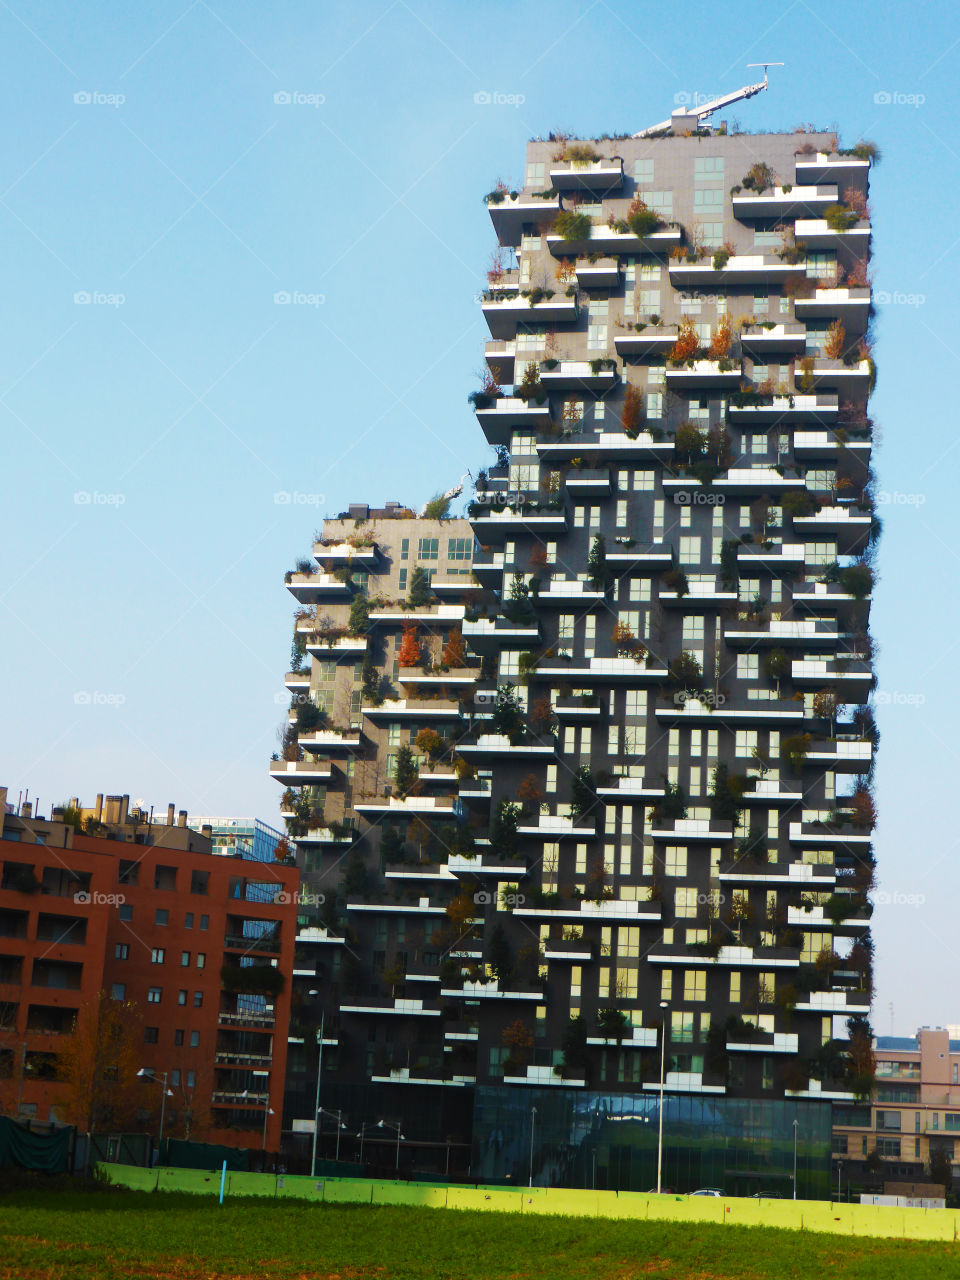 A strange building full of hanging gardens called vertical forest,Milan,Italy